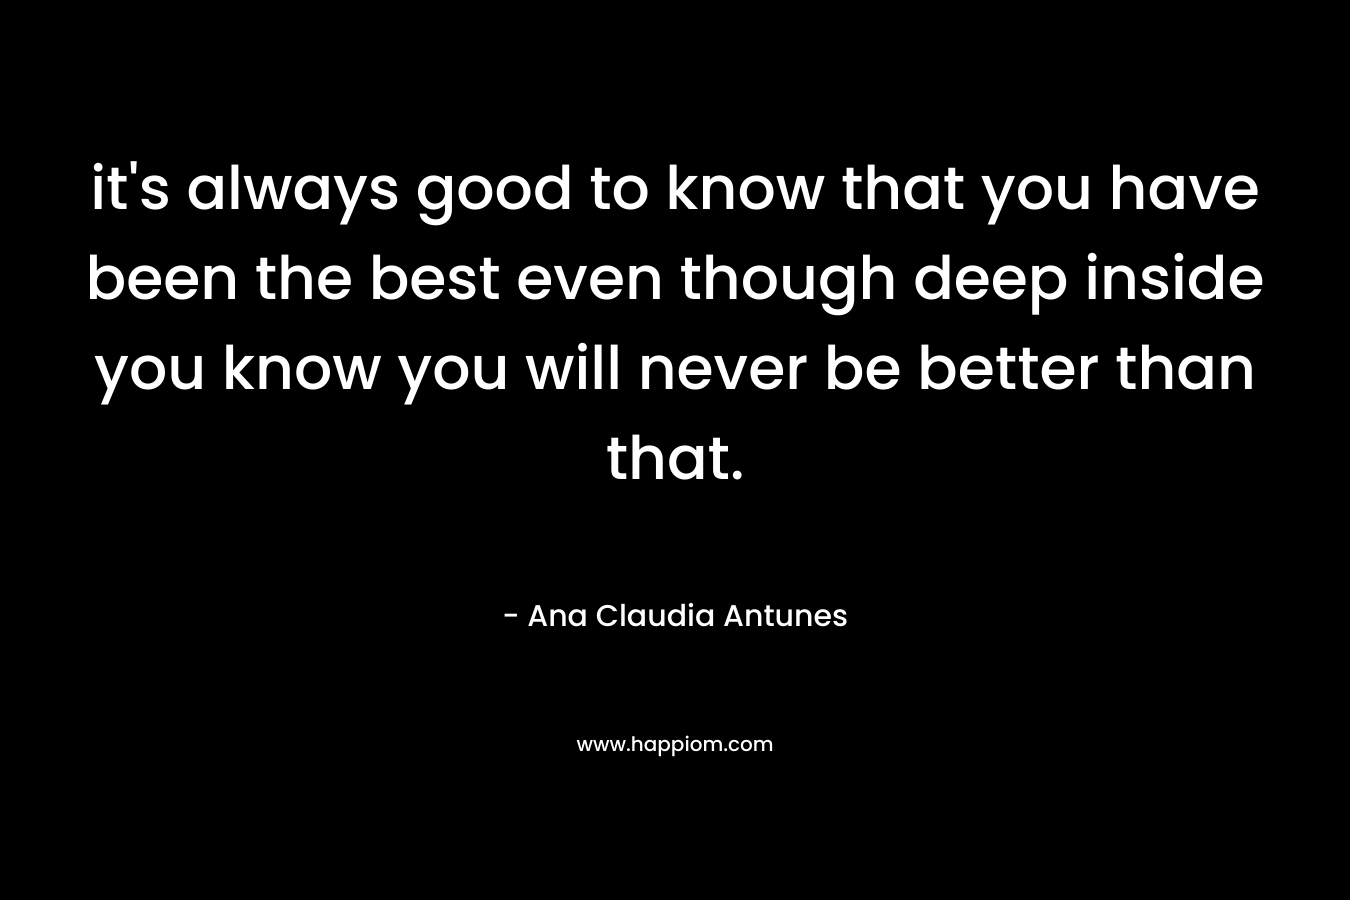 it's always good to know that you have been the best even though deep inside you know you will never be better than that.